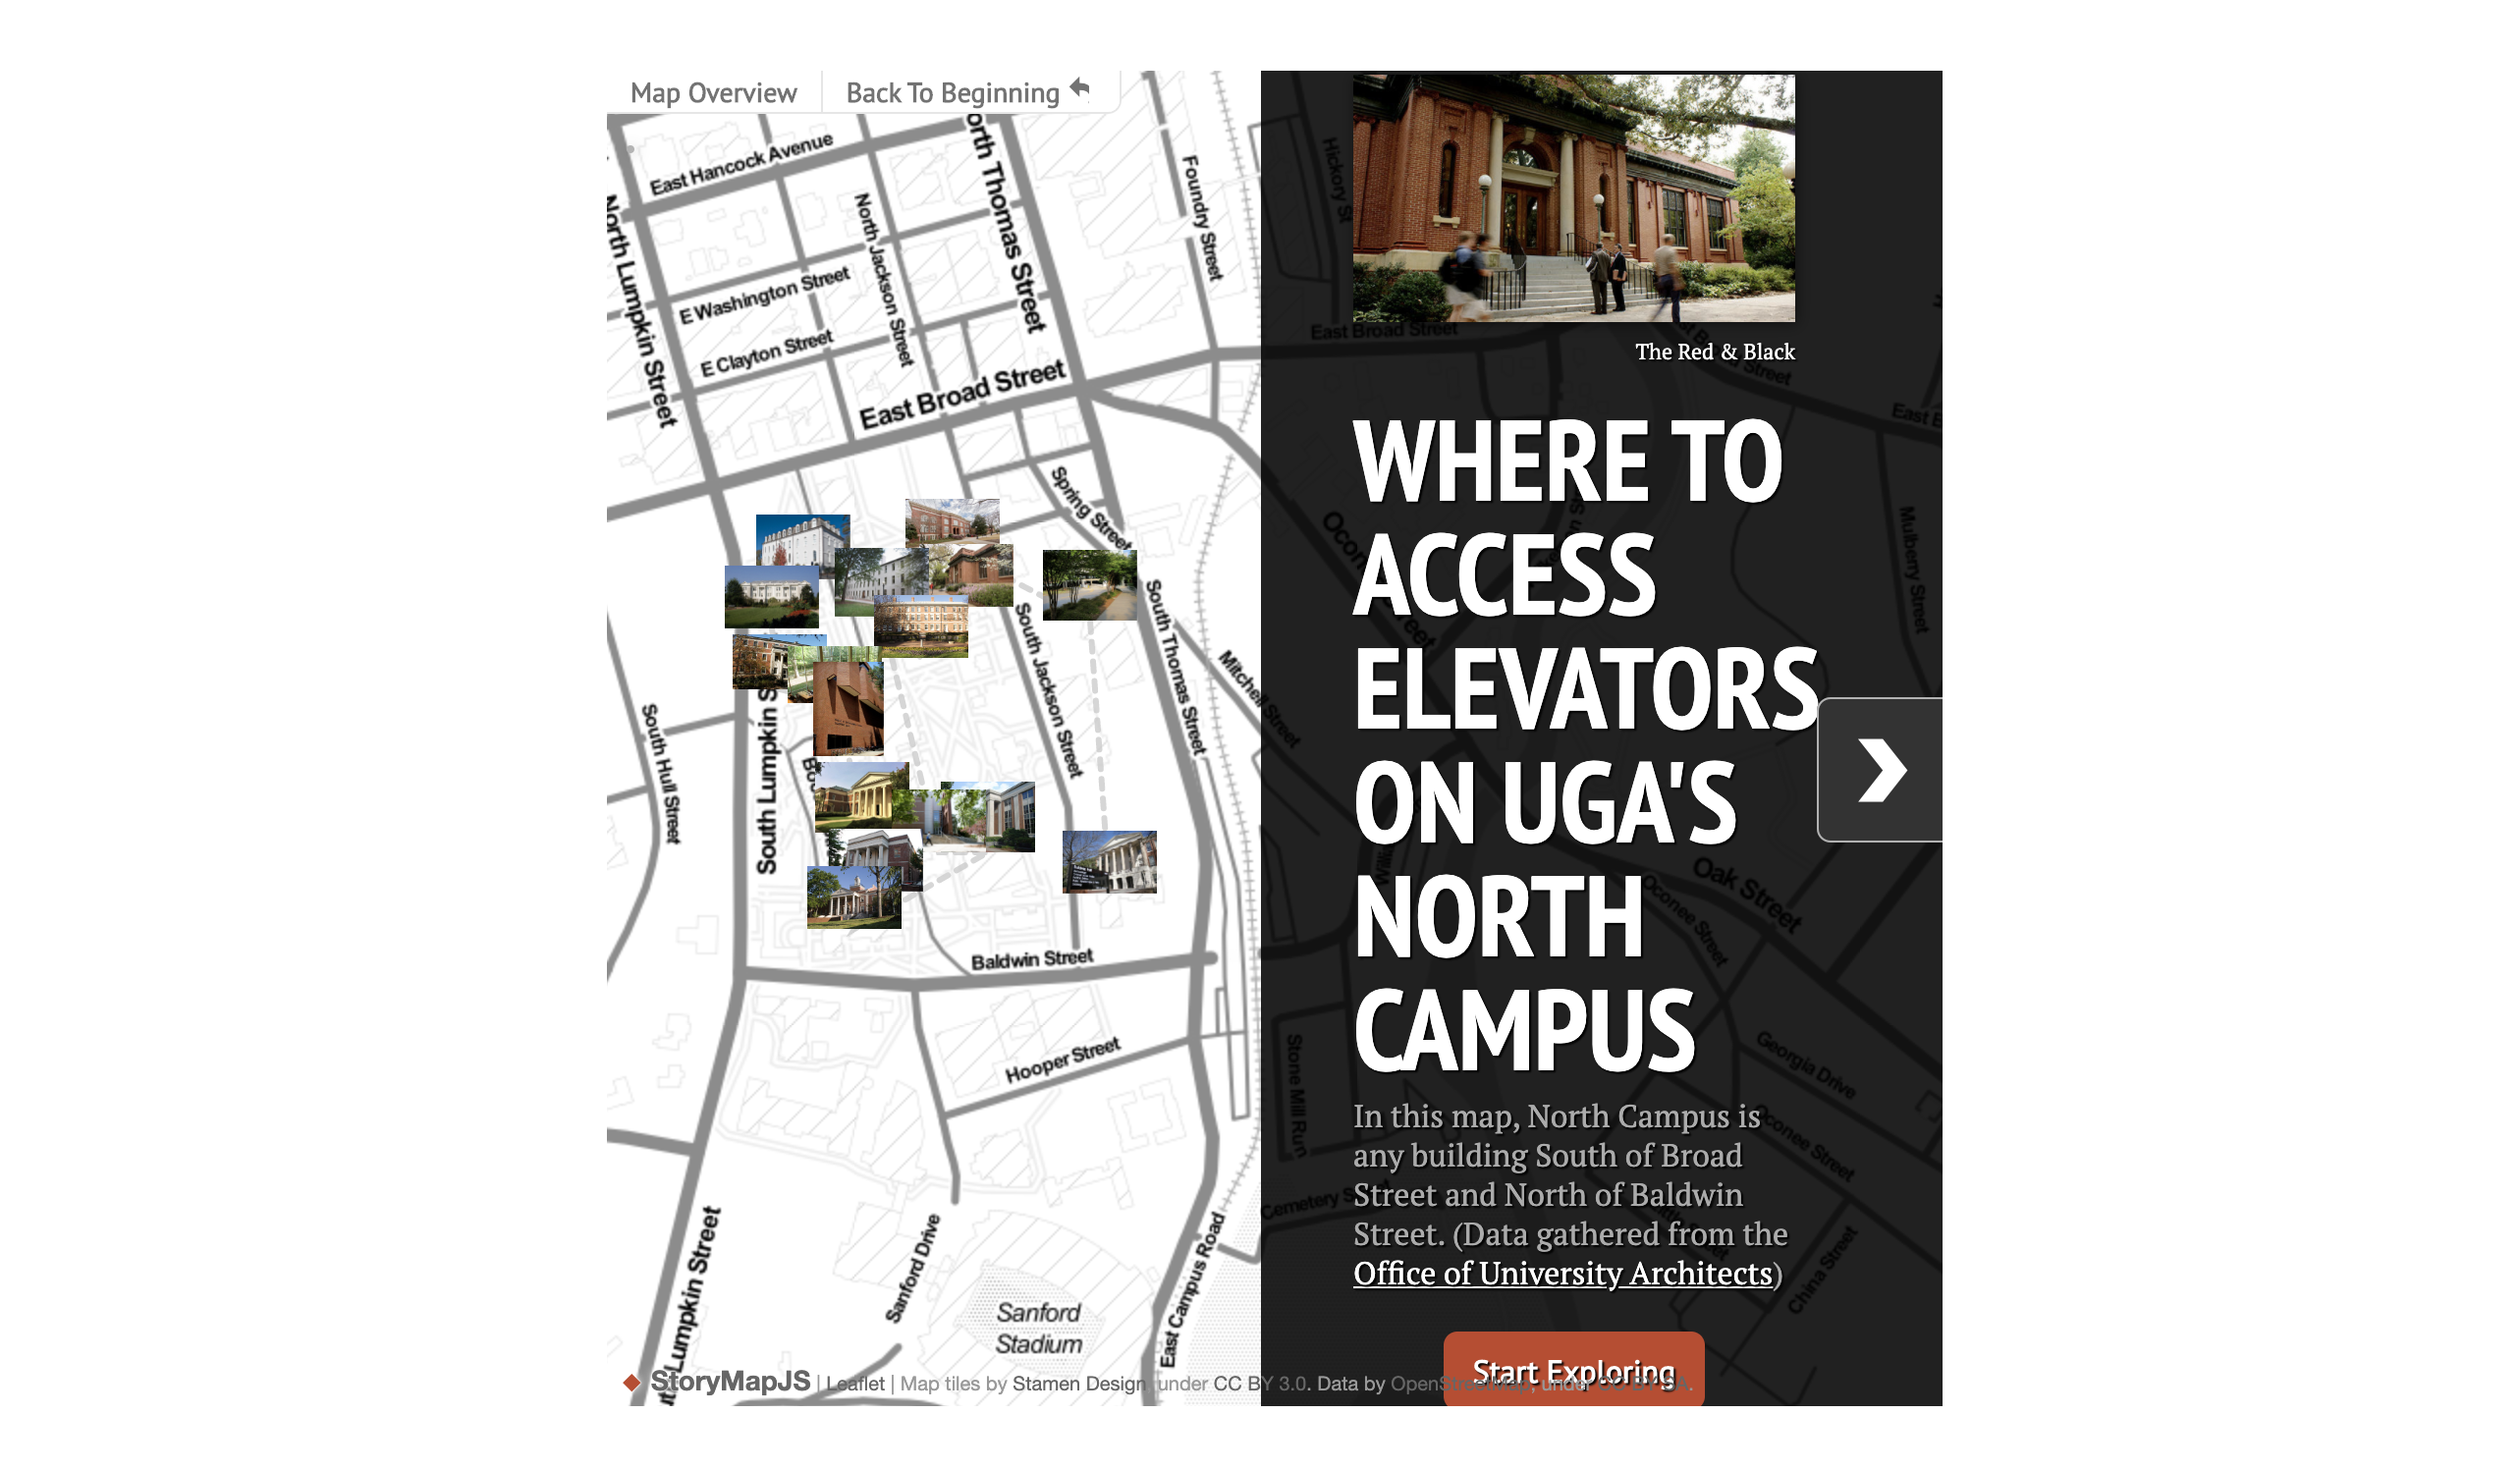 Graphic showing where to access elevators on UGA's north campus